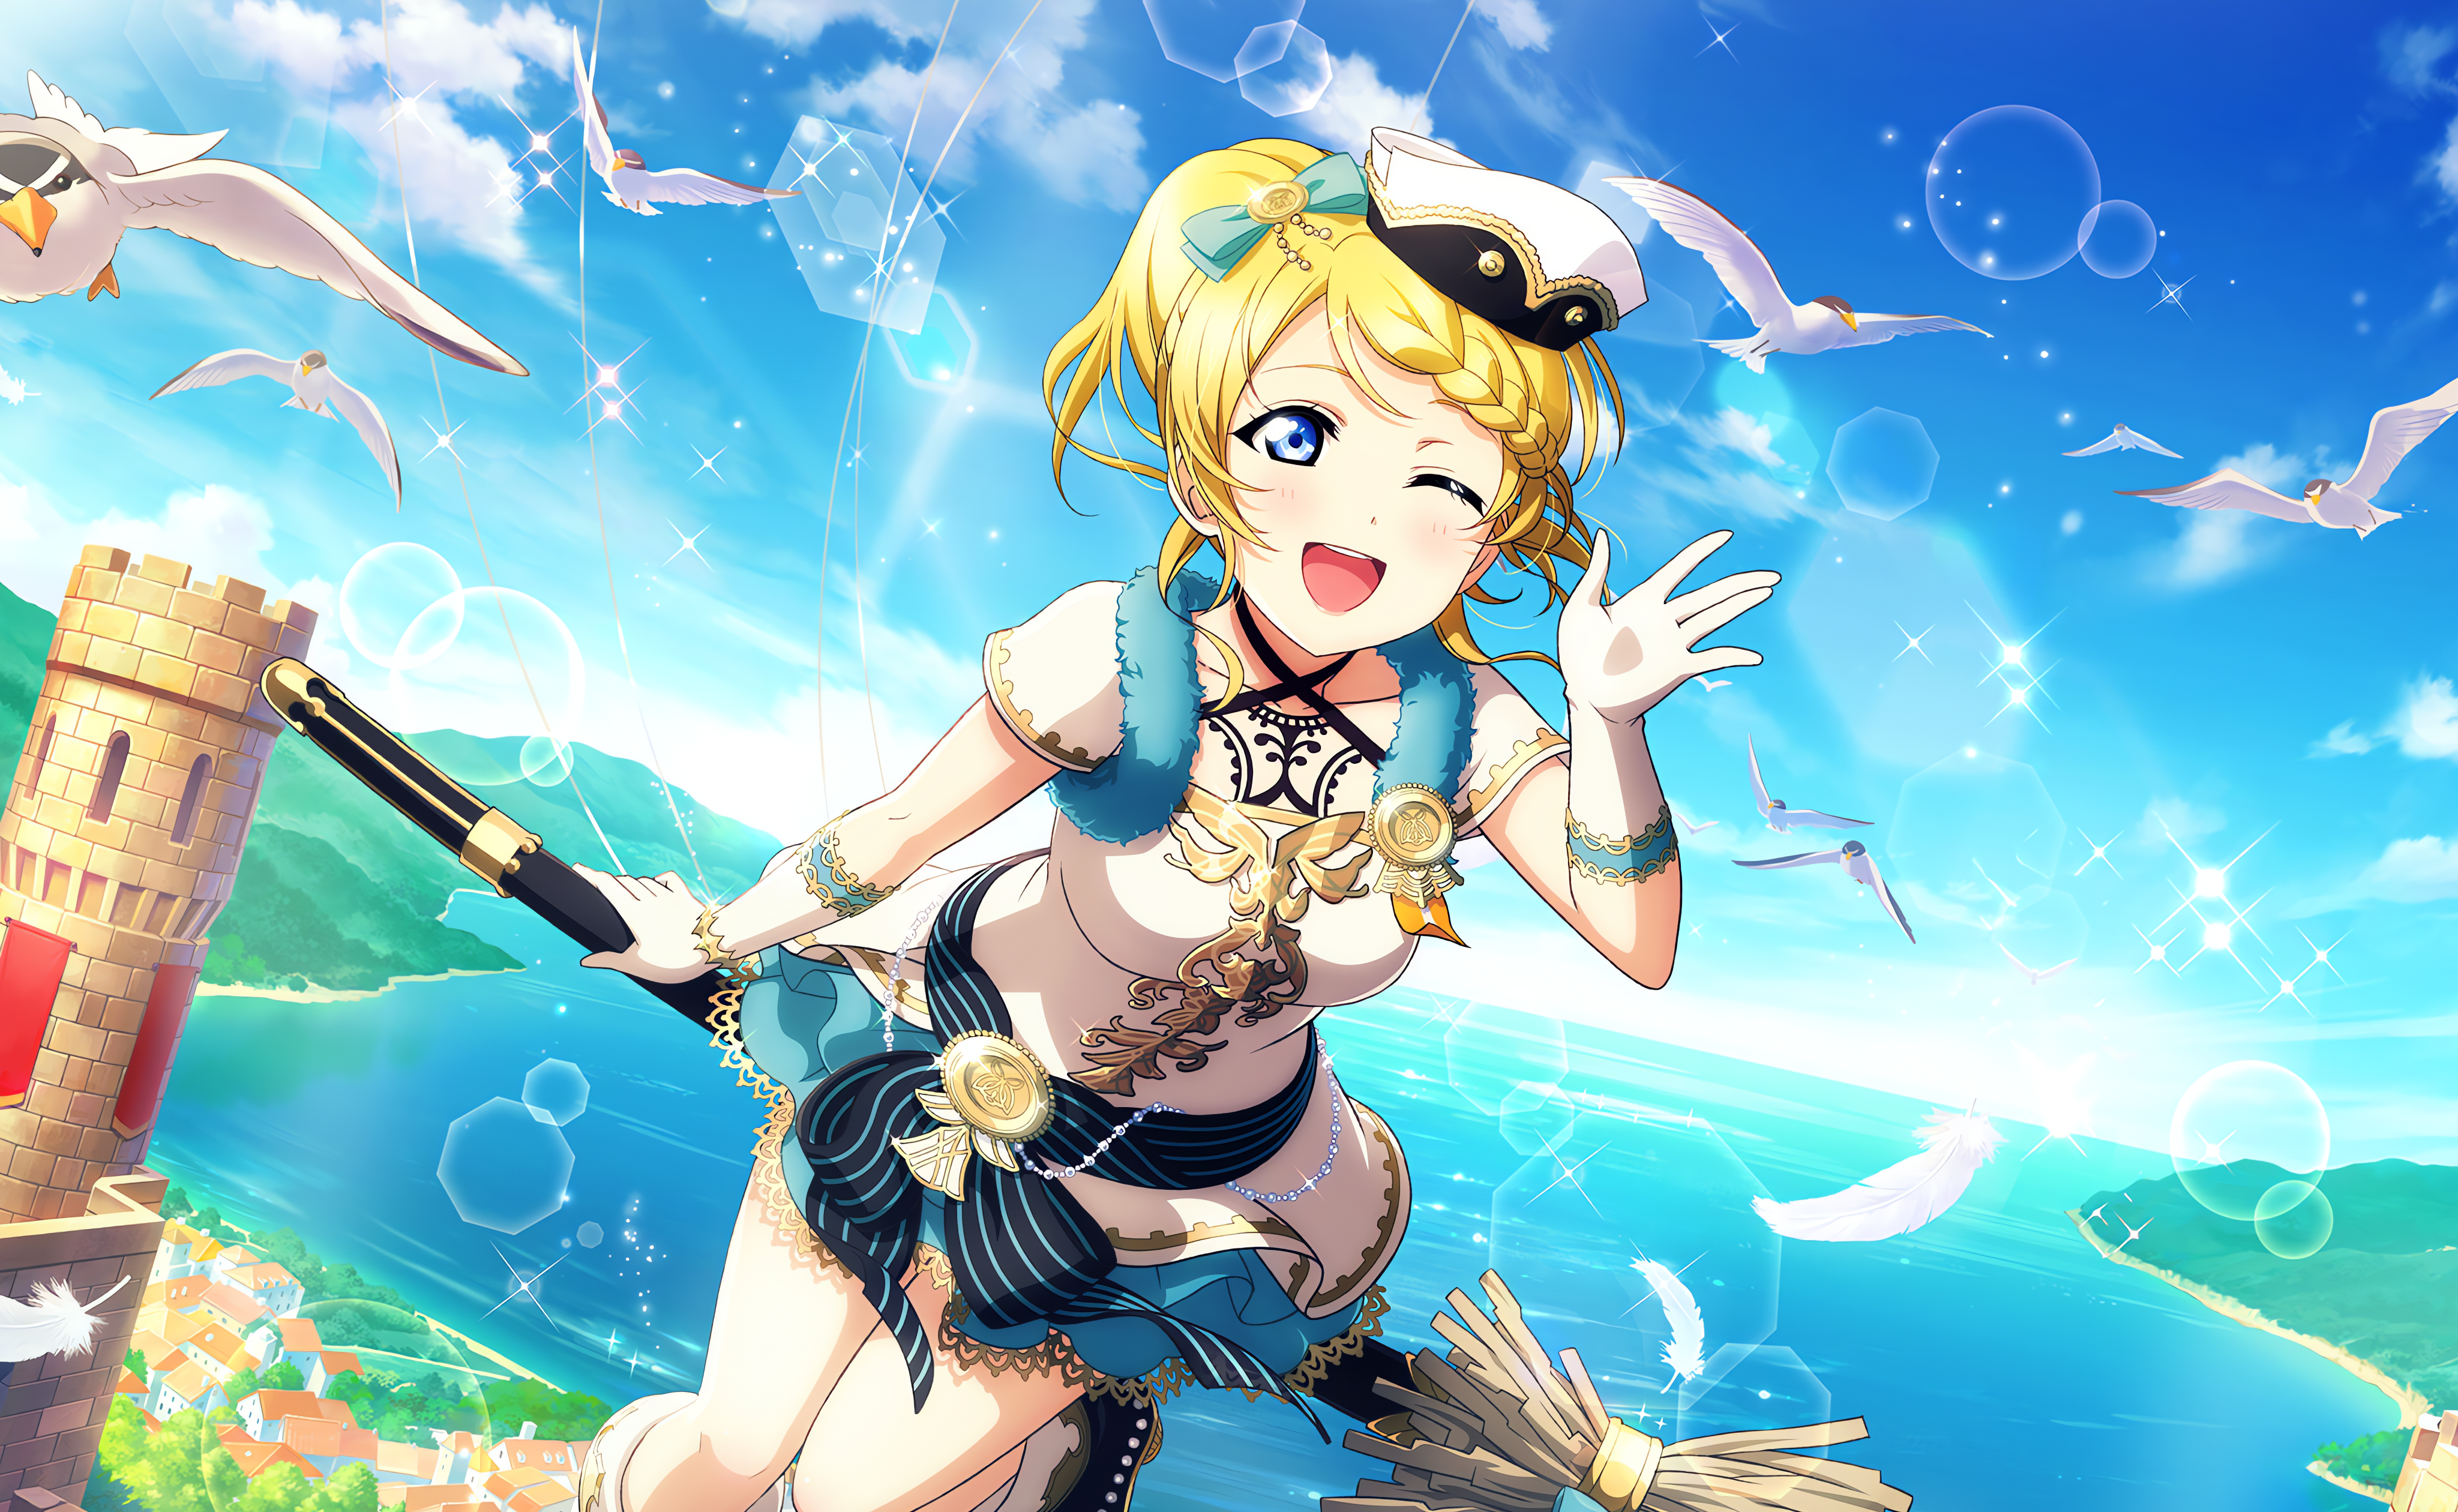 Ayase Eli Love Live Anime Anime Girls Sky Clouds Water Dress Bow Tie Gloves Open Mouth Braids Birds  4096x2520